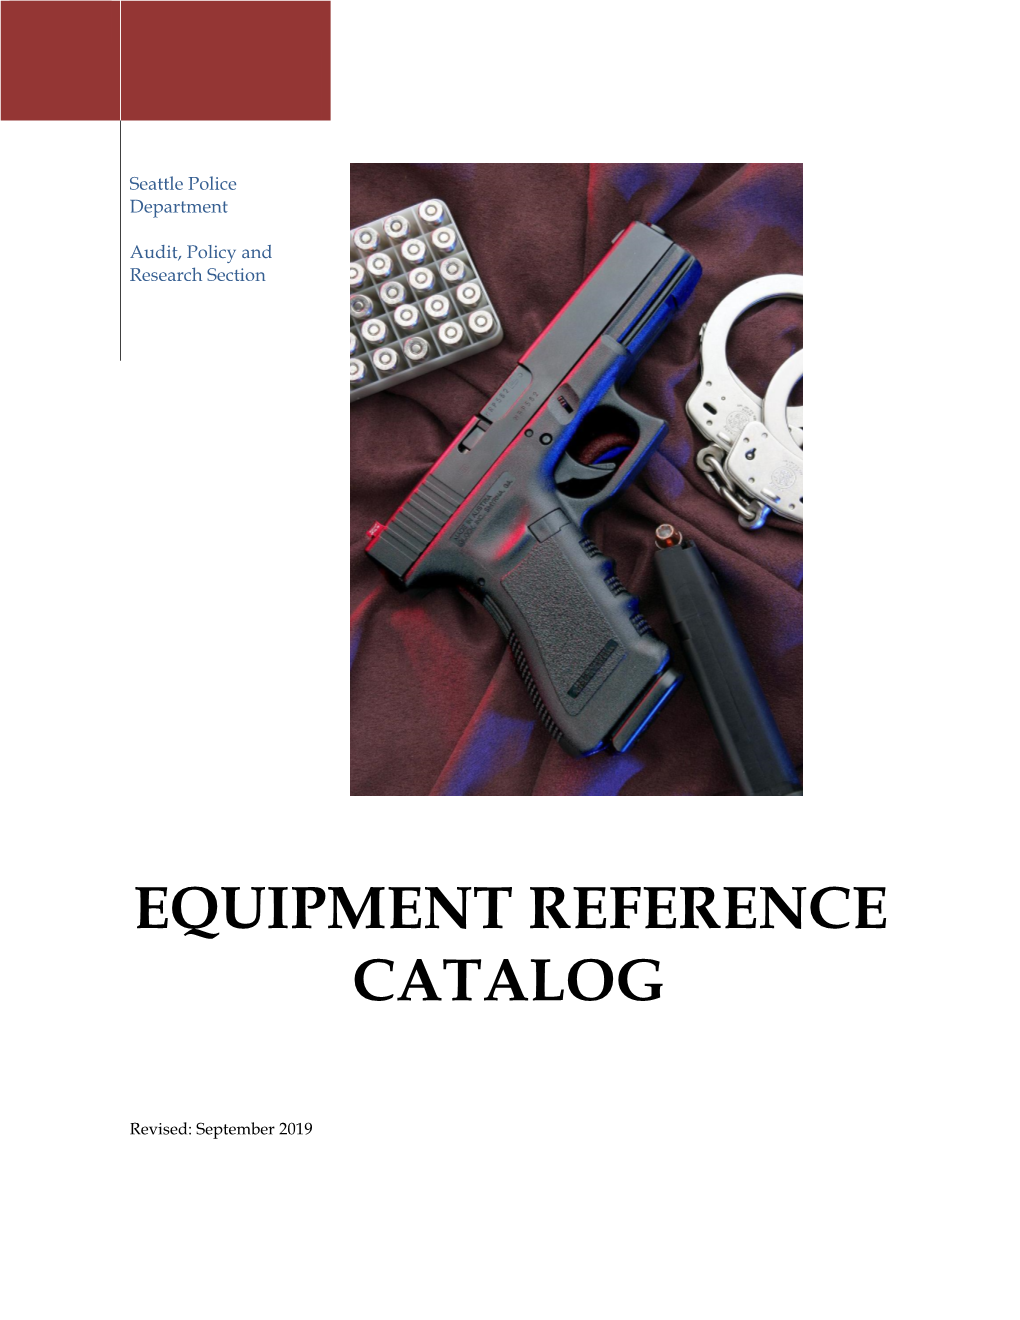 Equipment Reference Catalog